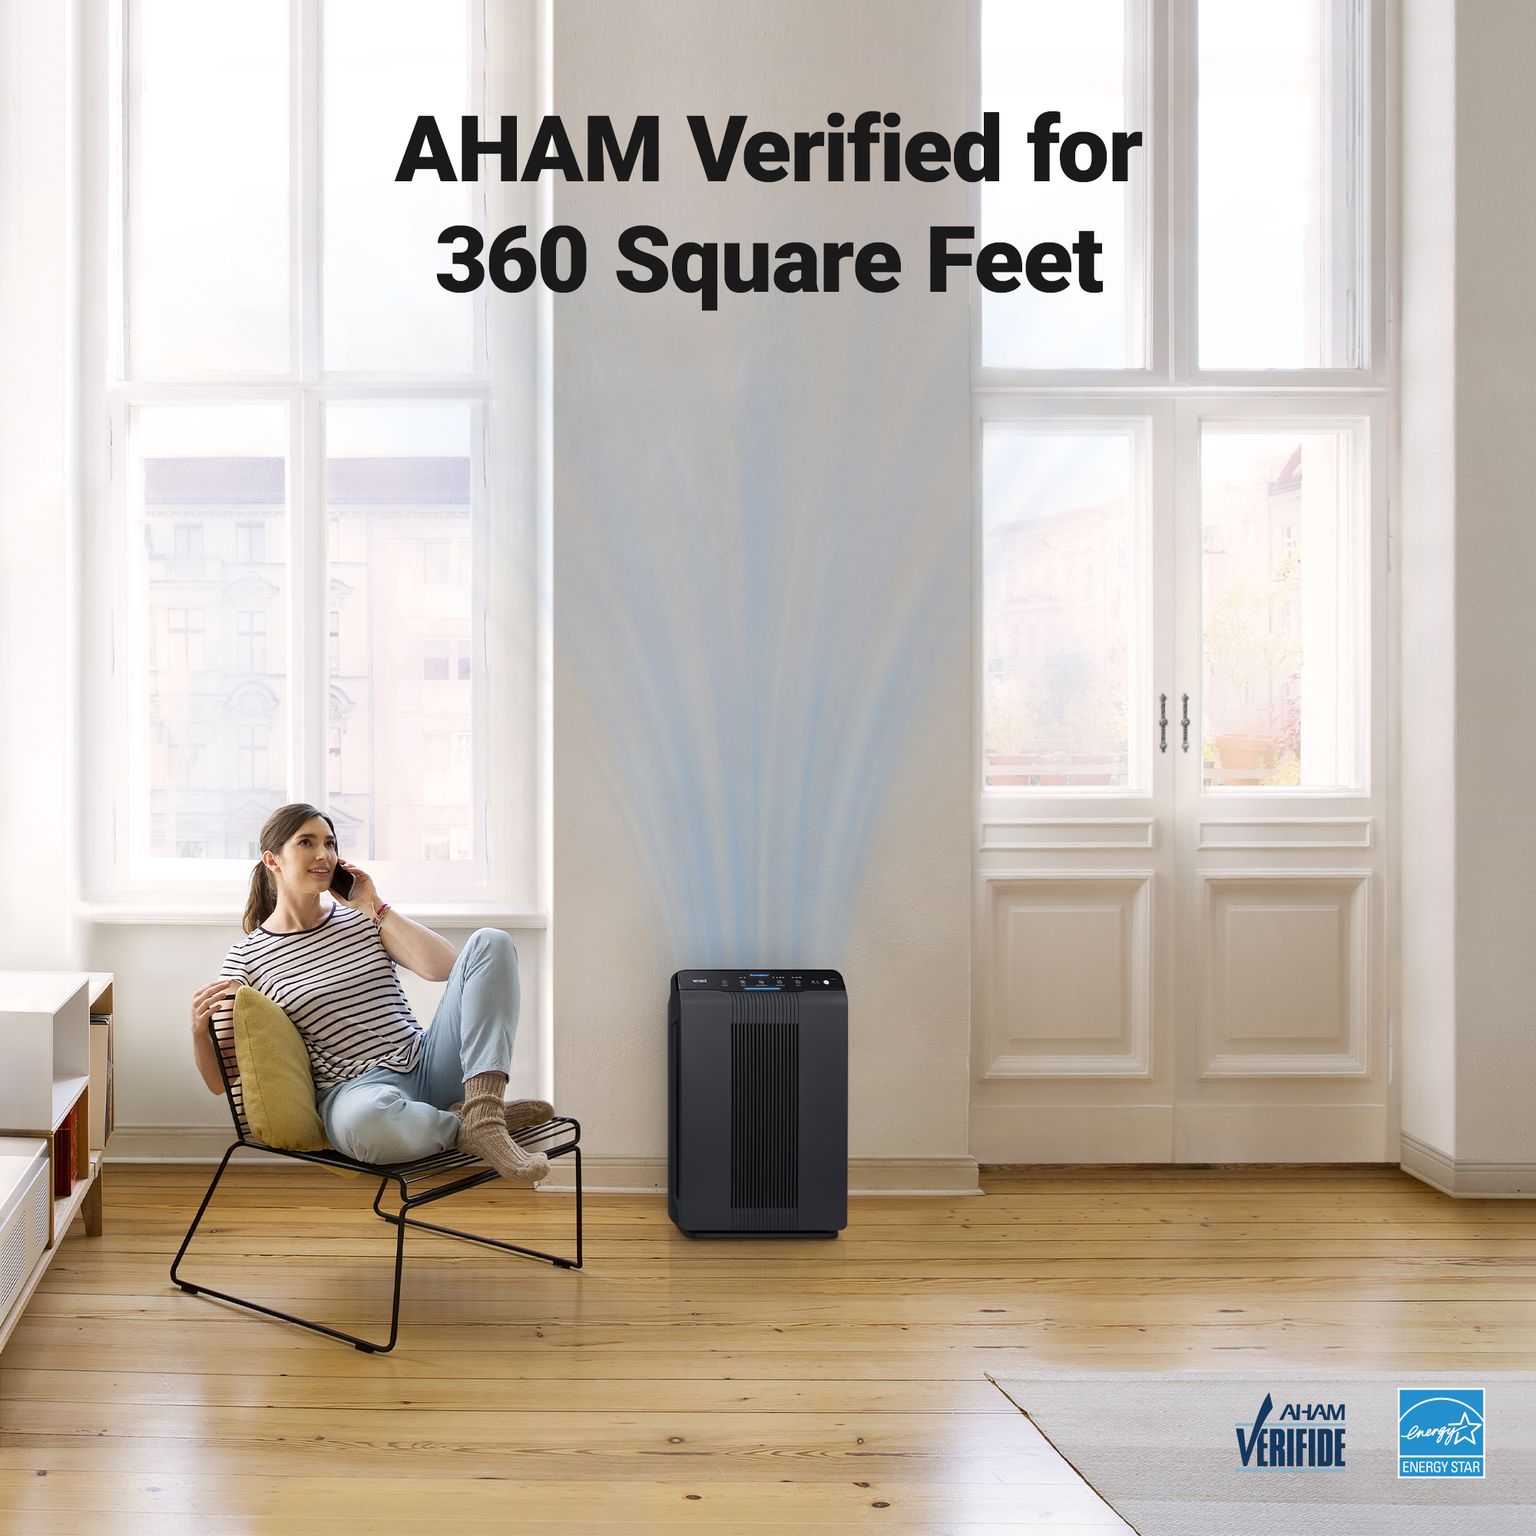 Winix 5500-2 Air Purifier with True HEPA for Particles, PlasmaWave and Odor Reducing Washable AOC Carbon Filter. AHAM Verified for 360 sq ft, Max Room Capacity of 1728 sq ft - image 6 of 7